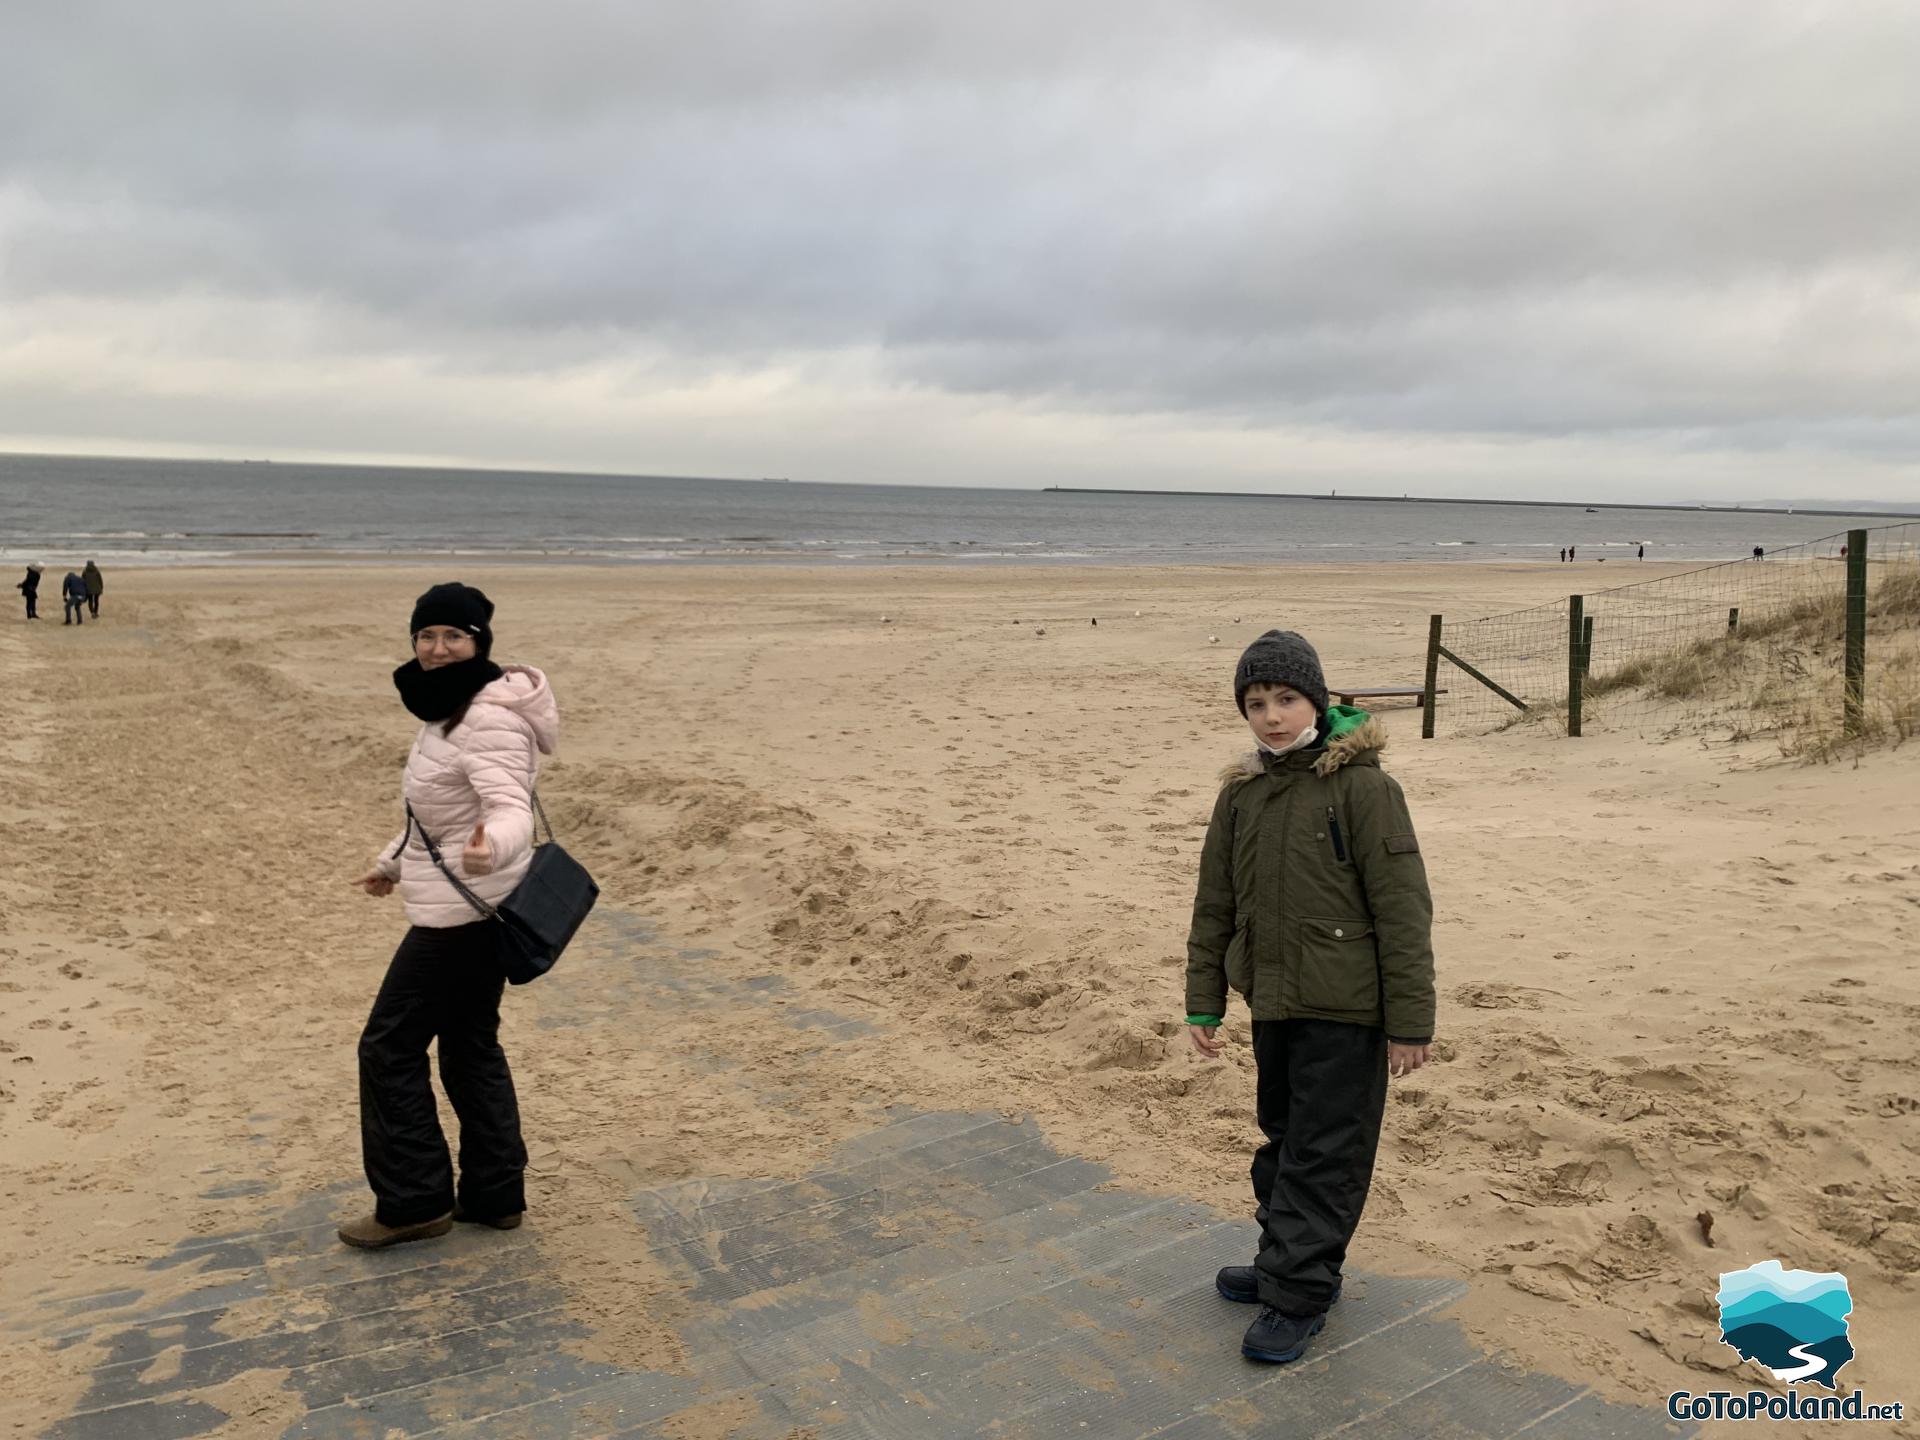 a woman and a boy are walking on a beach